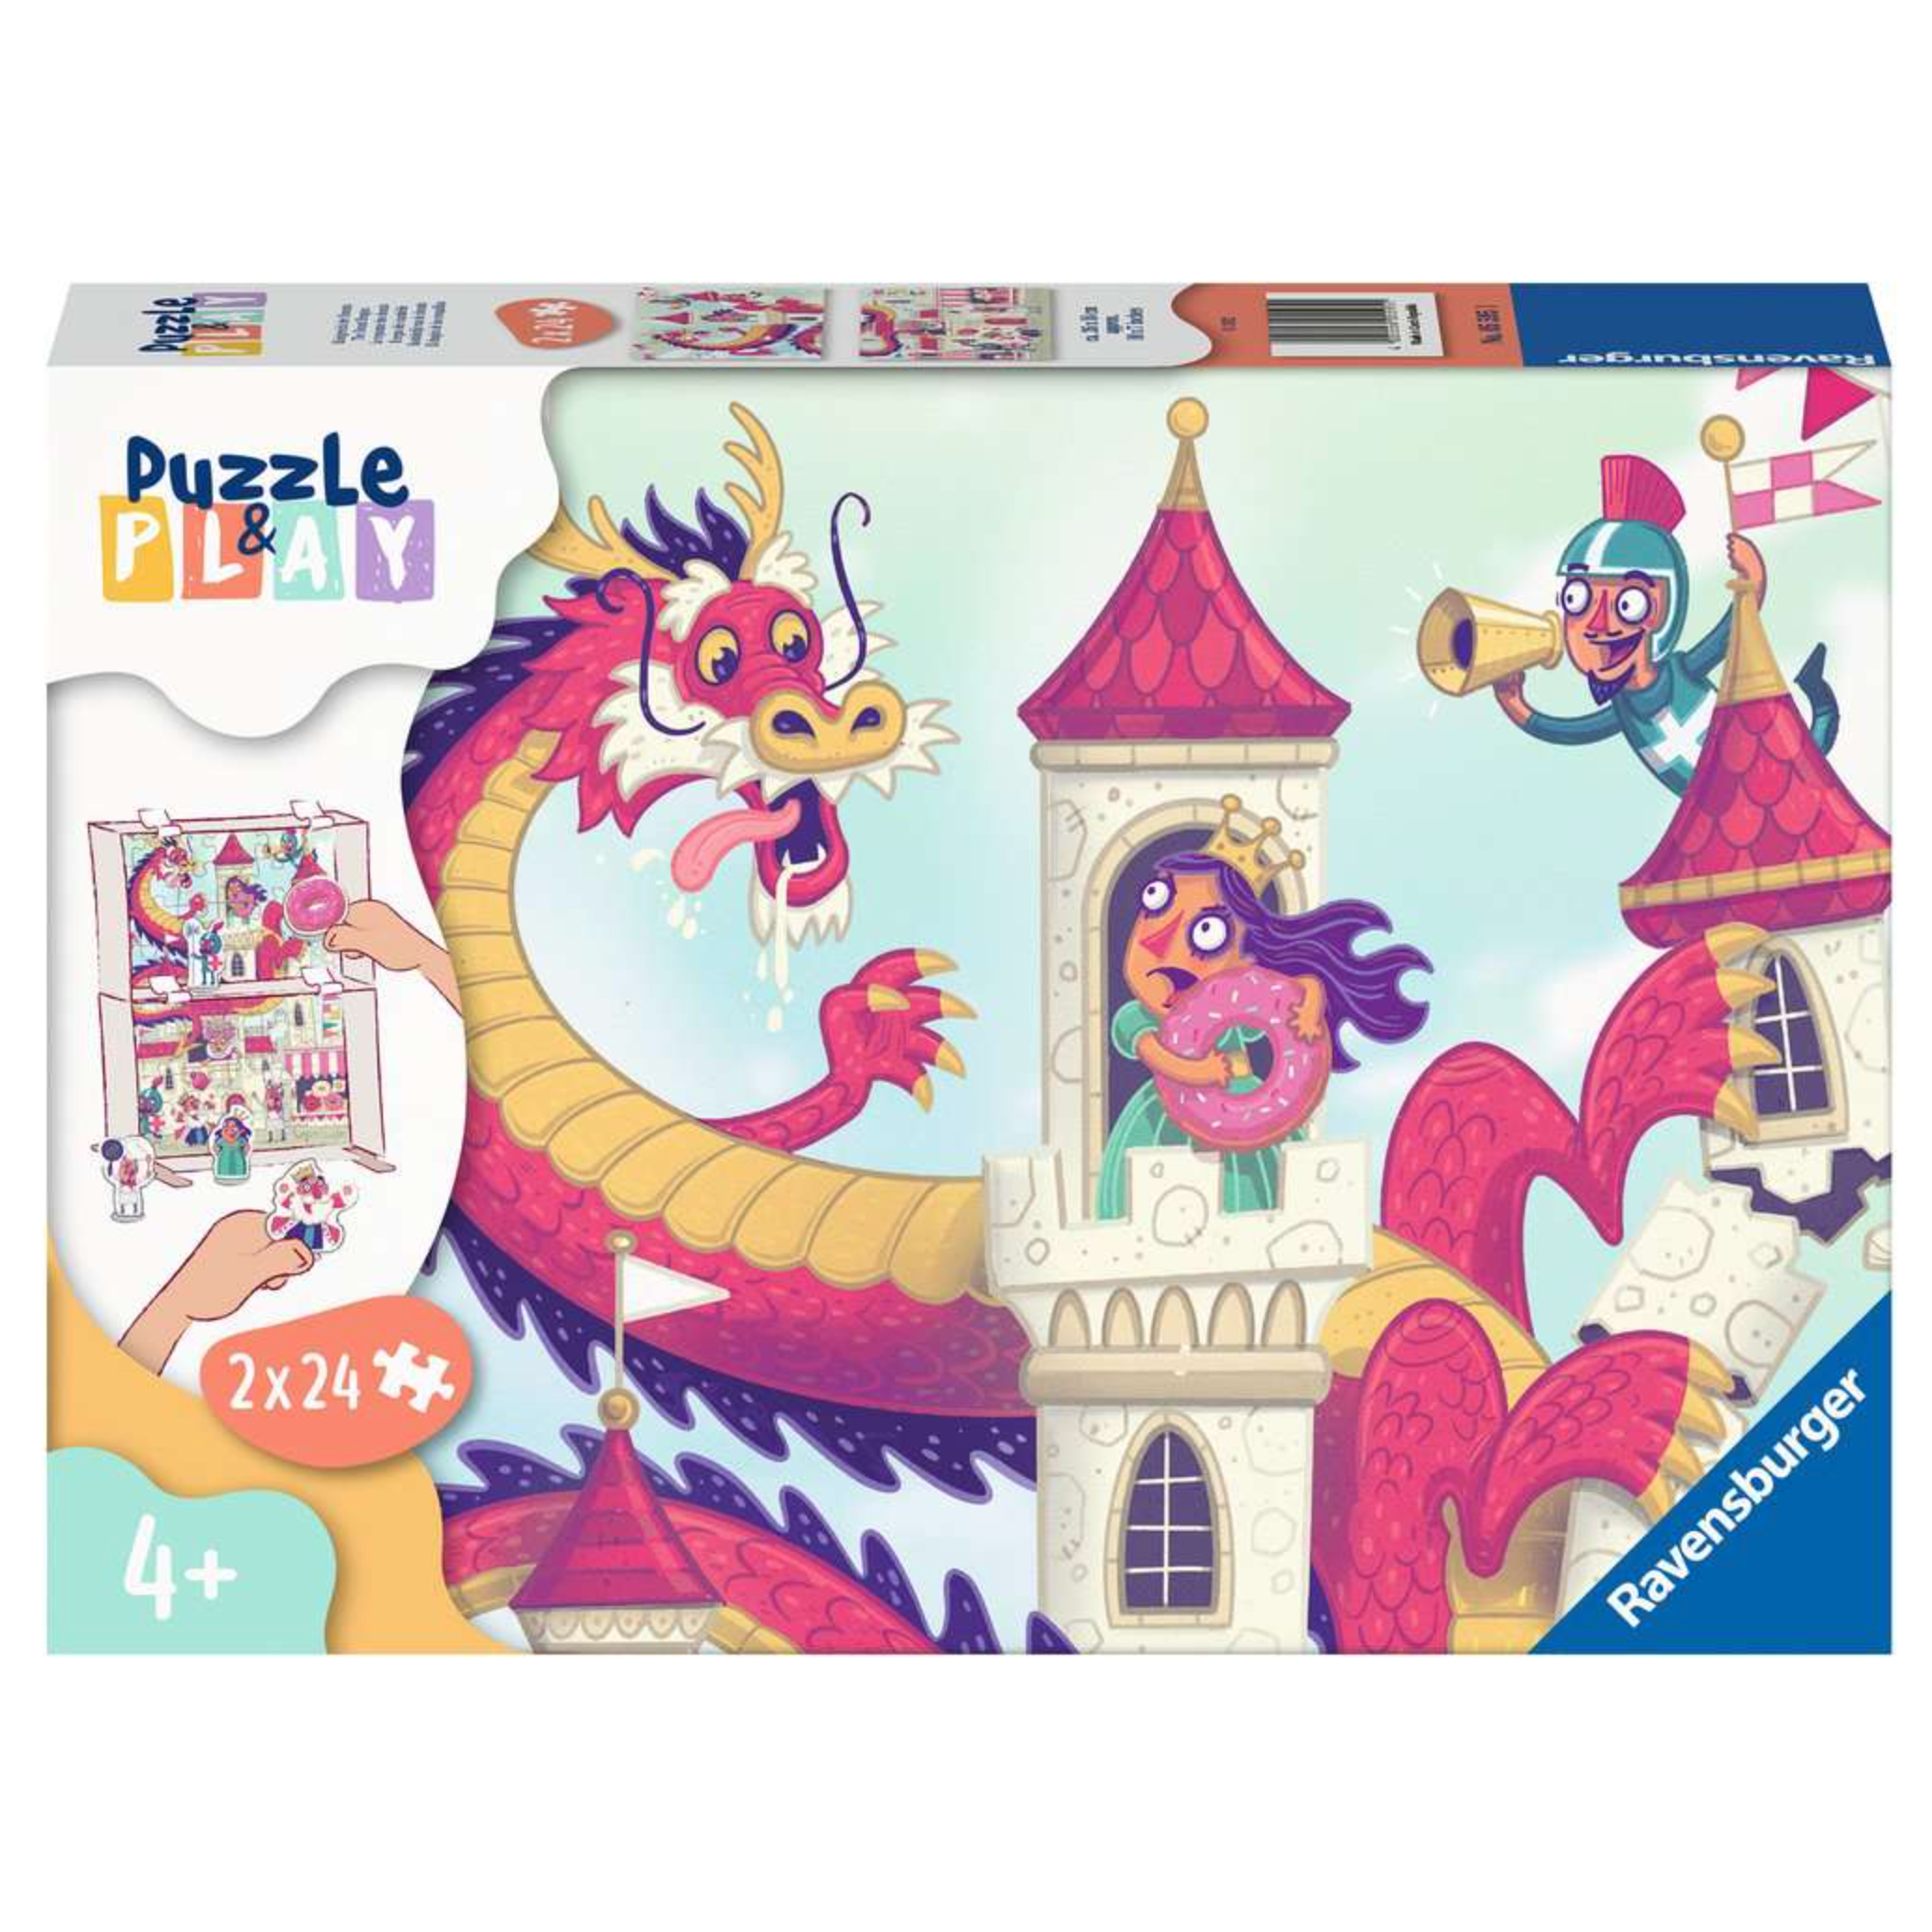 Puzzle &amp; Play: Donut Dragon 2x24pc